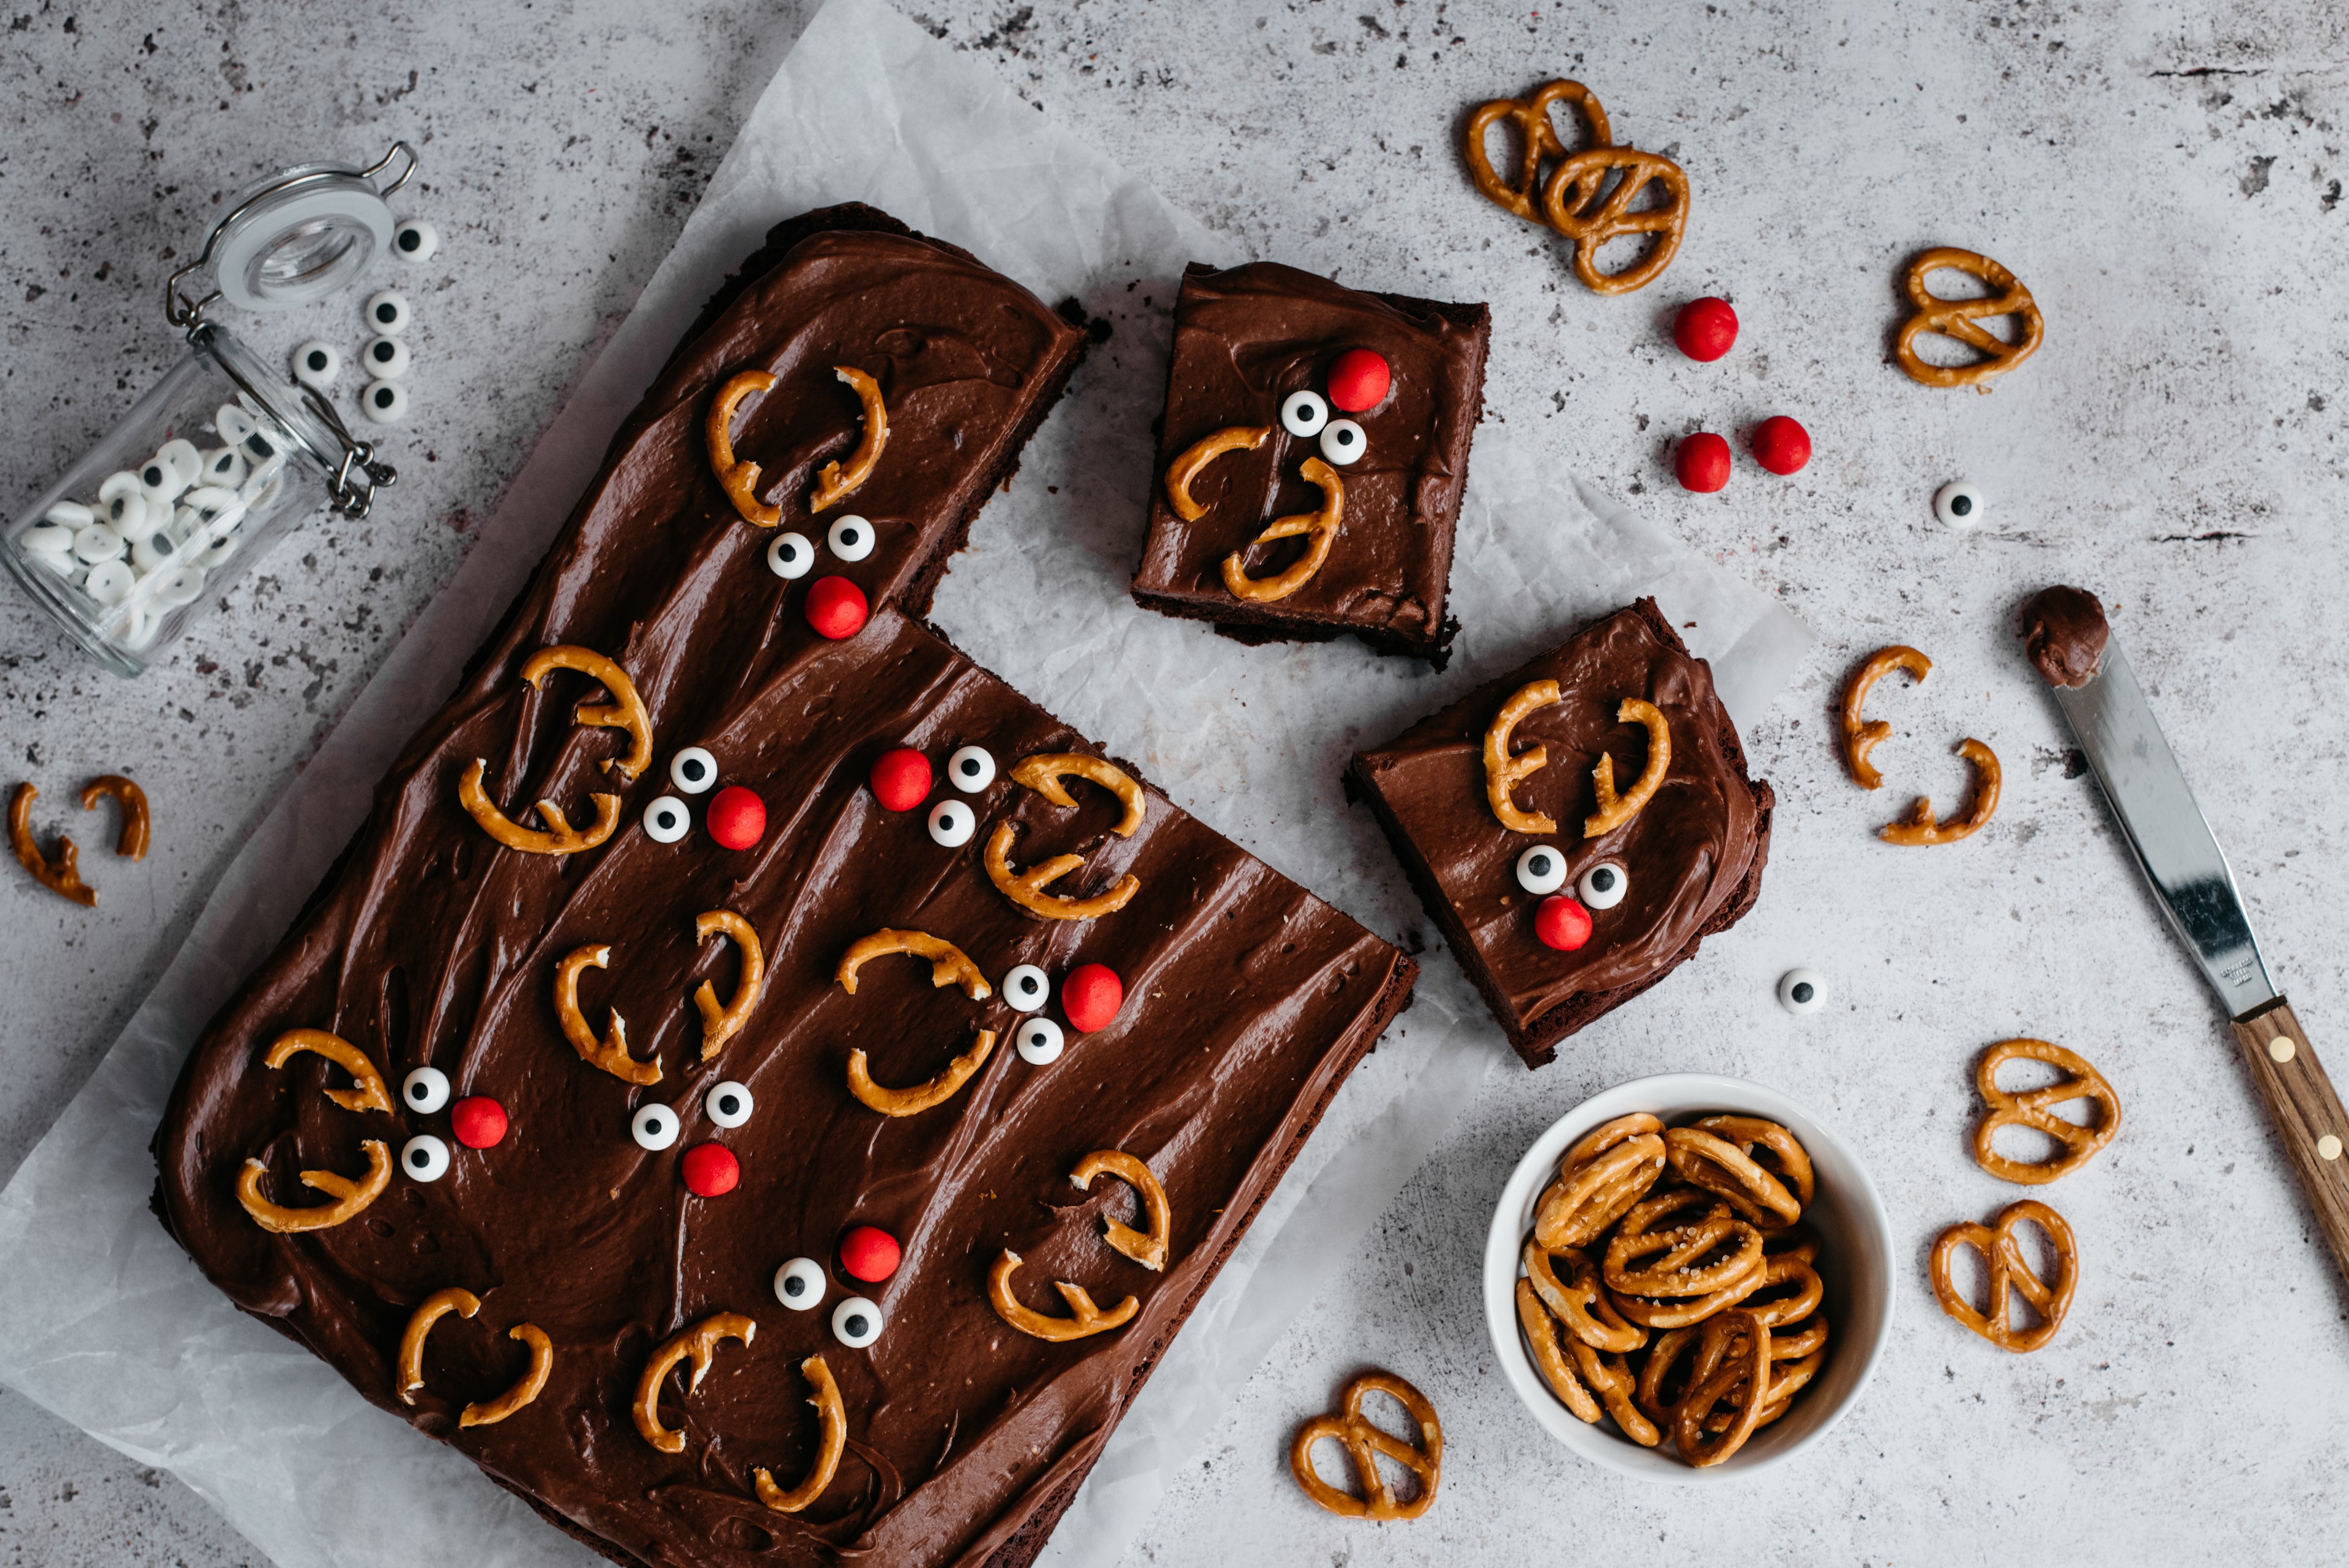 Chocolate & Caramel Reindeer Traybake with slices cut out, decorated with pretzels and red sweets.